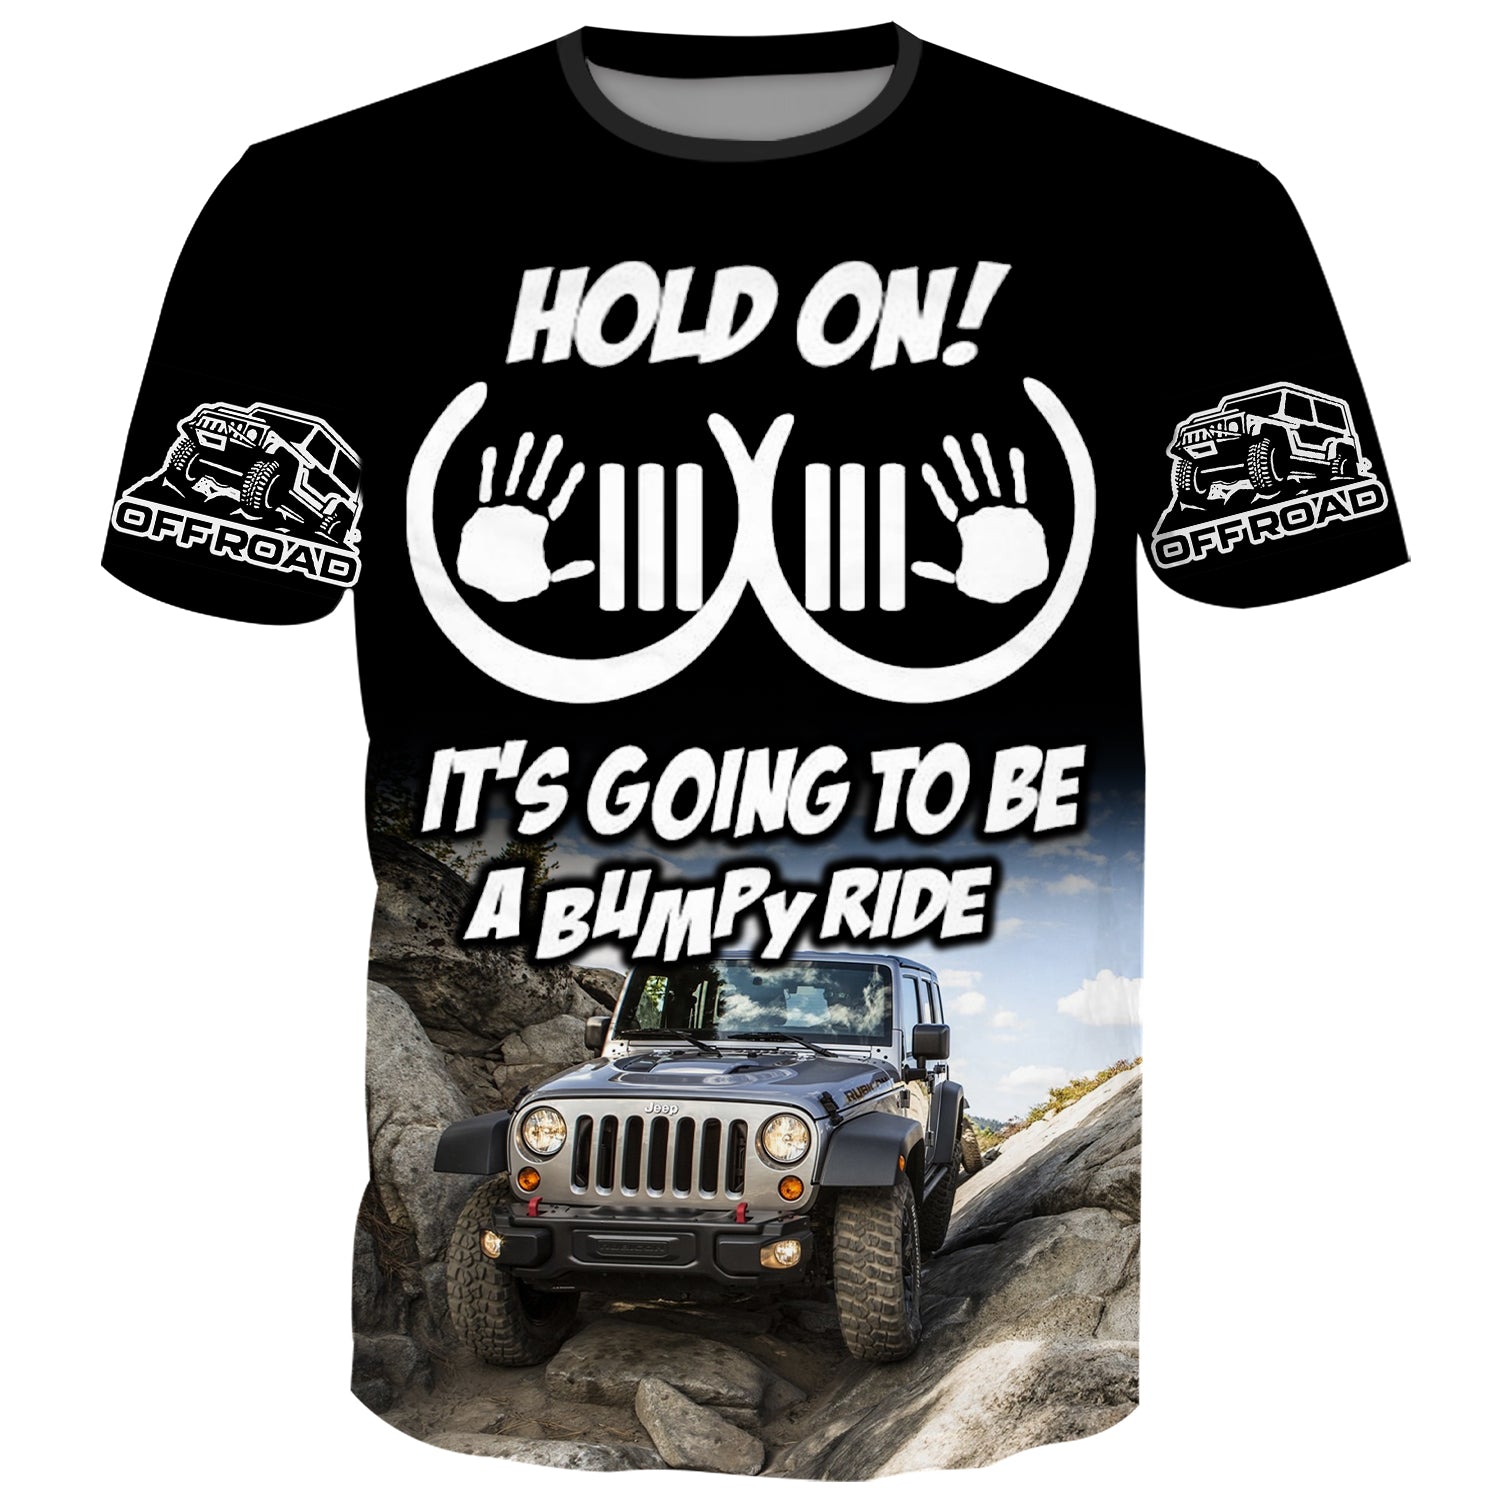 Hold on It's going to be a bumpy ride - T-Shirt